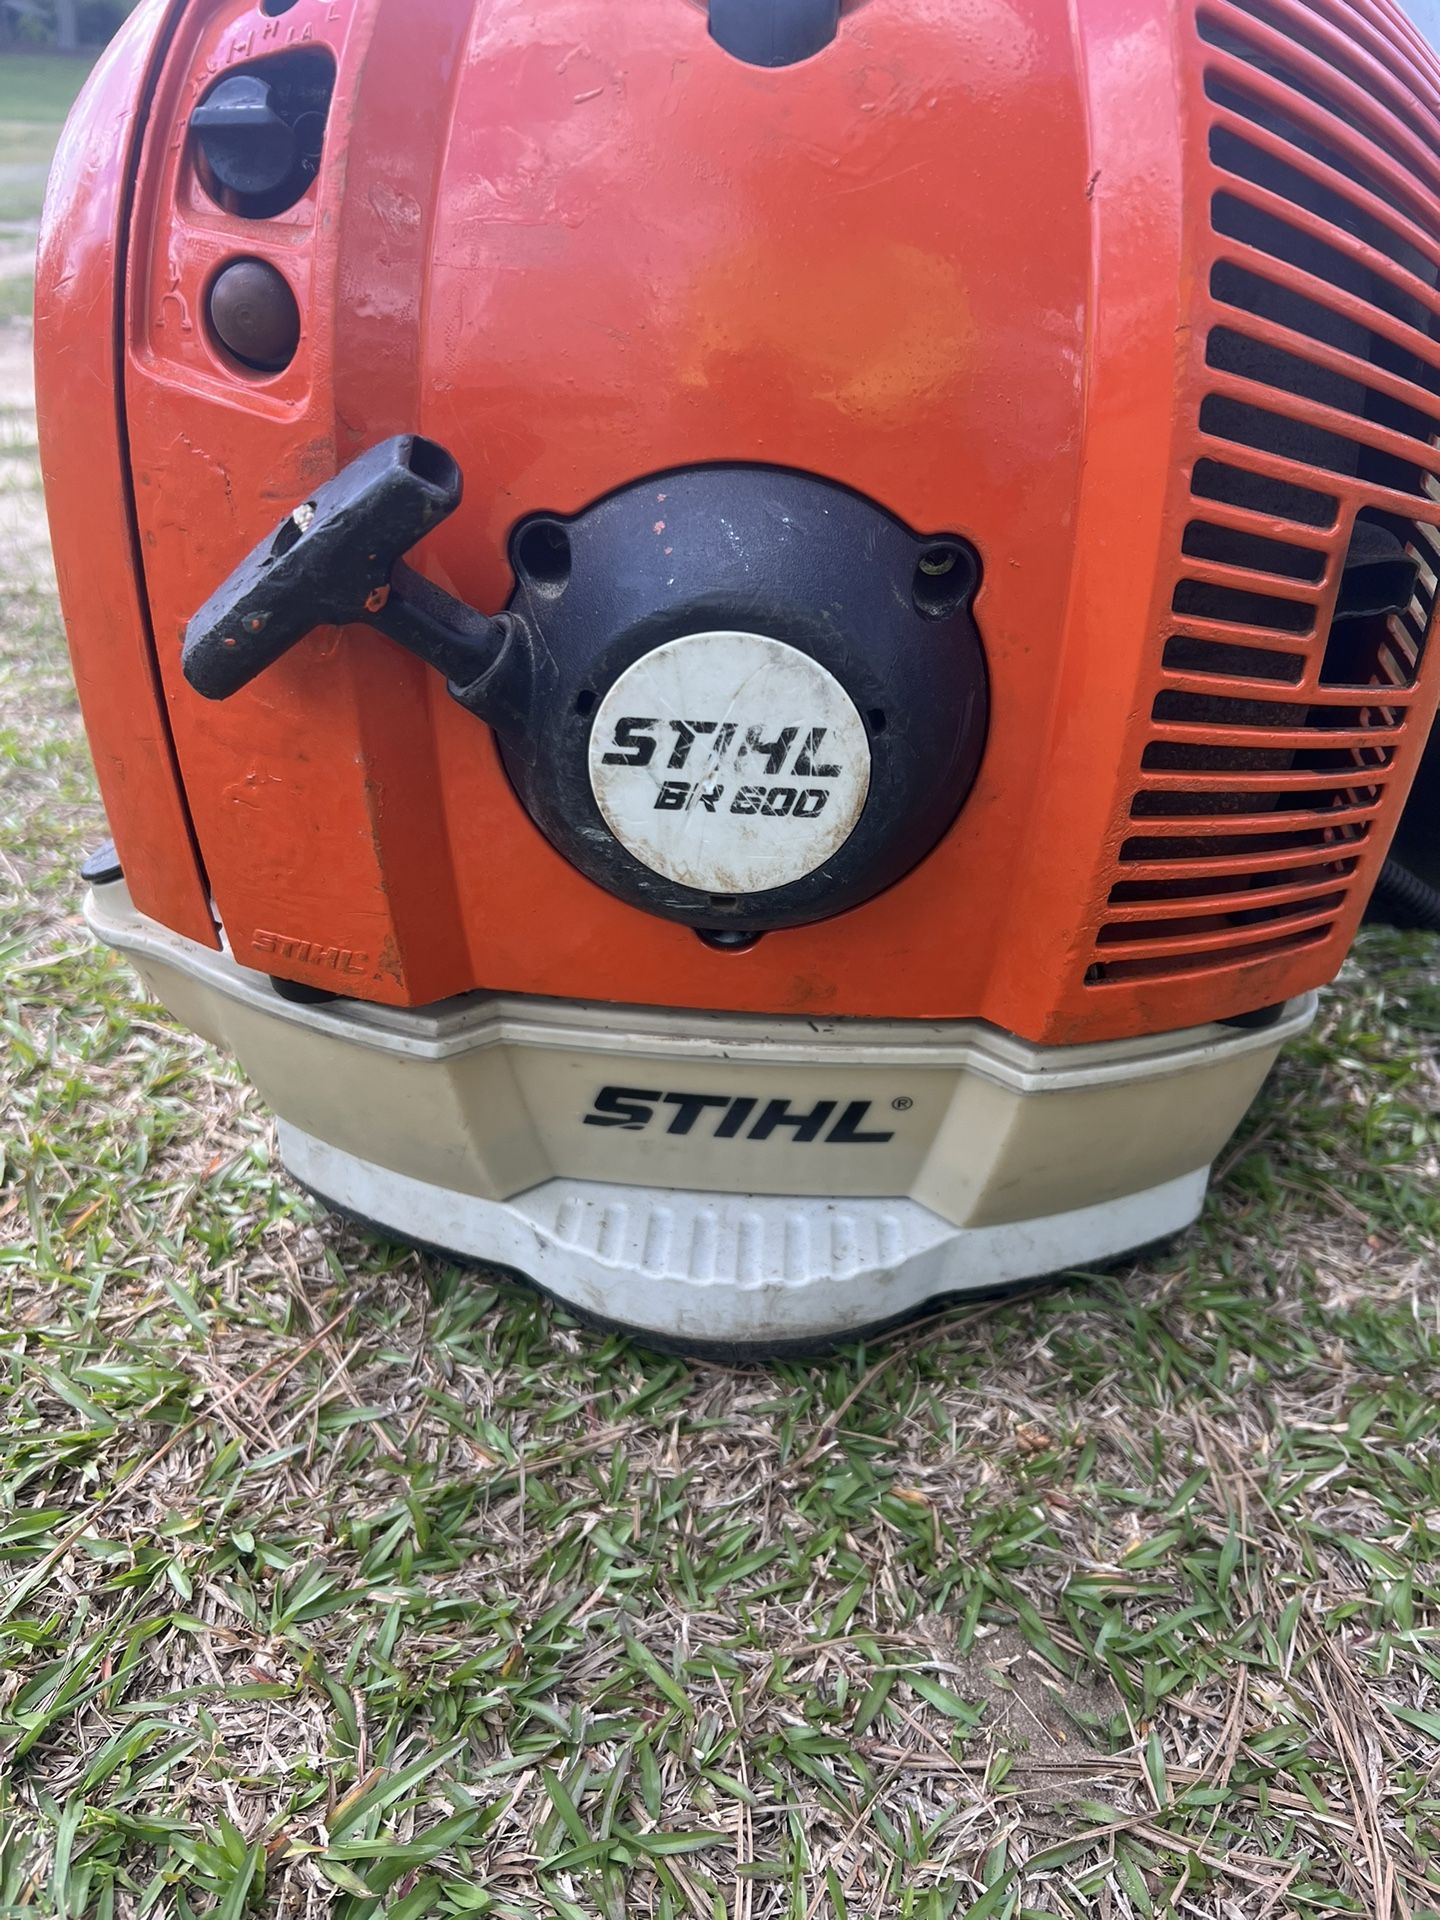 Sthil BR600 Backpack Blower